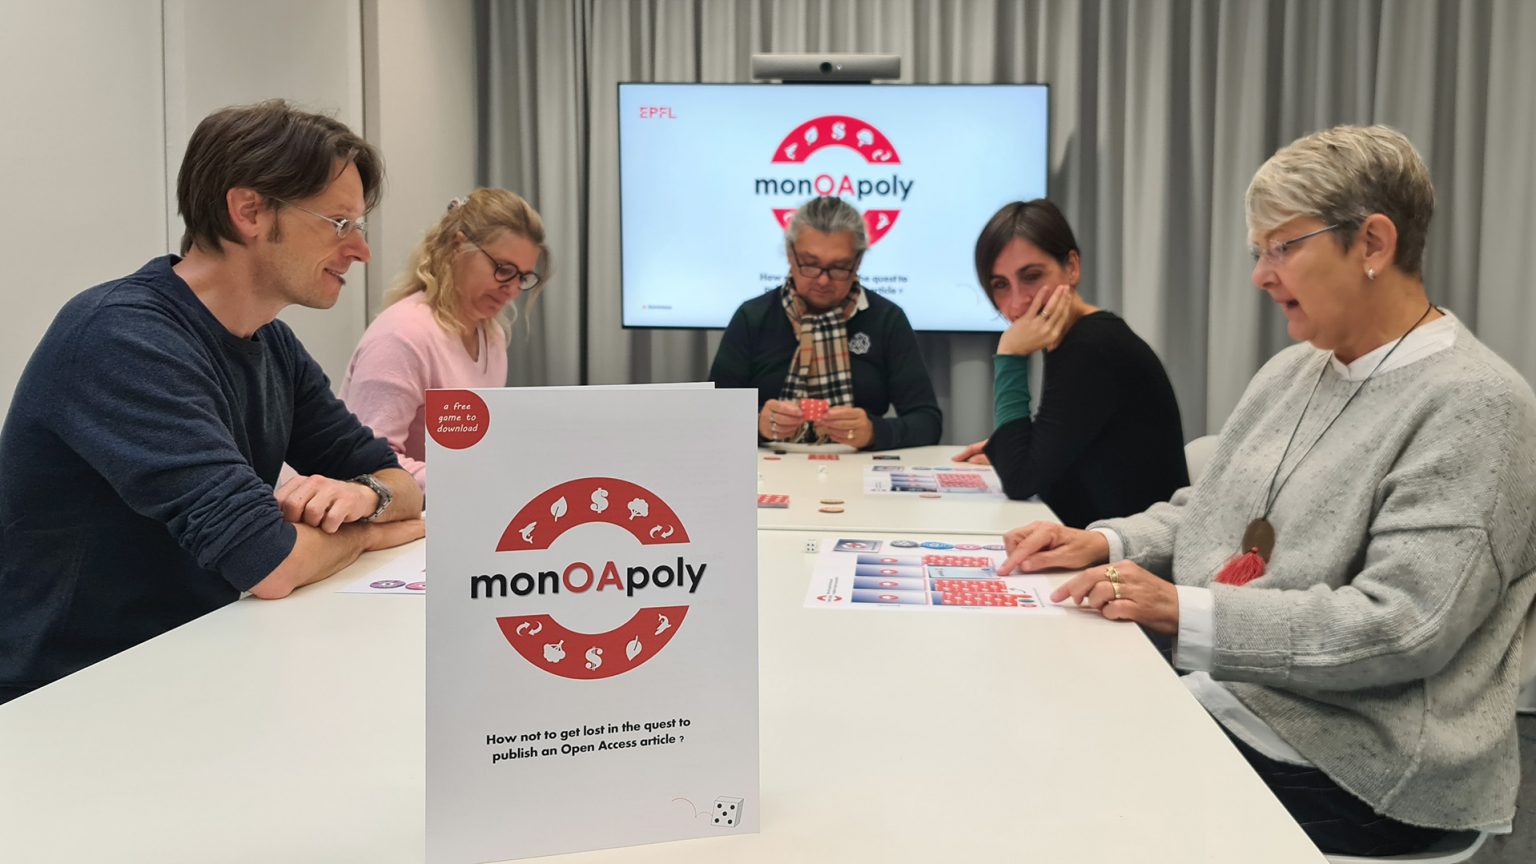 monOApoly: a new board game about Open Access